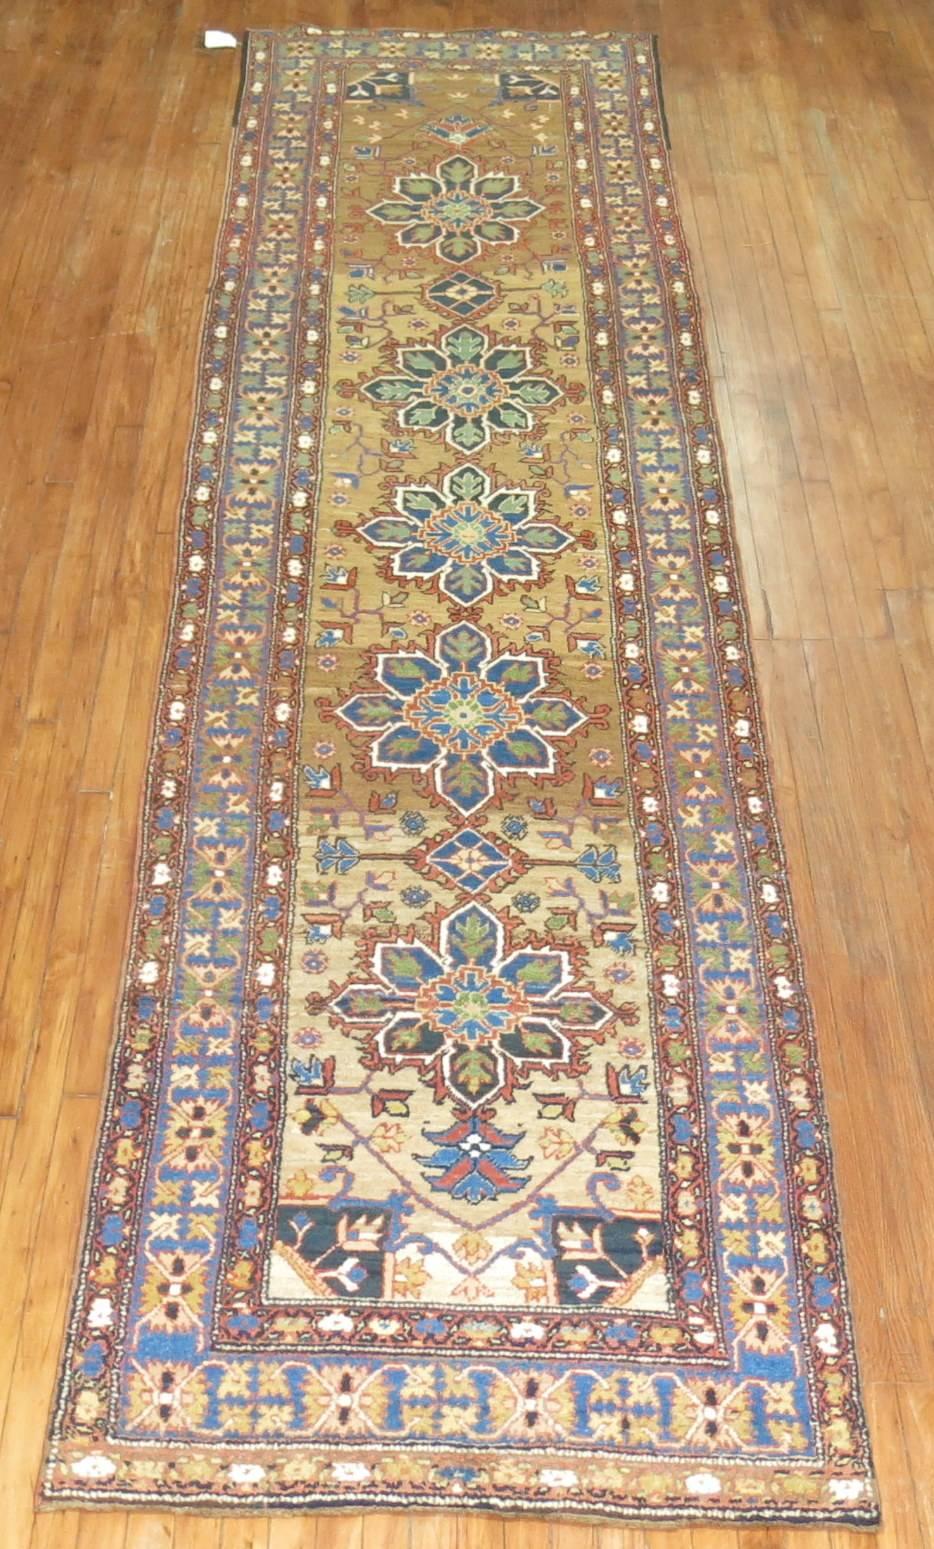 Interesting Persian kurd bidjar runner, accents in different shades of blue, green, orange on a camel abrashed ground.

Measures: 3'6'' x 14'7''.